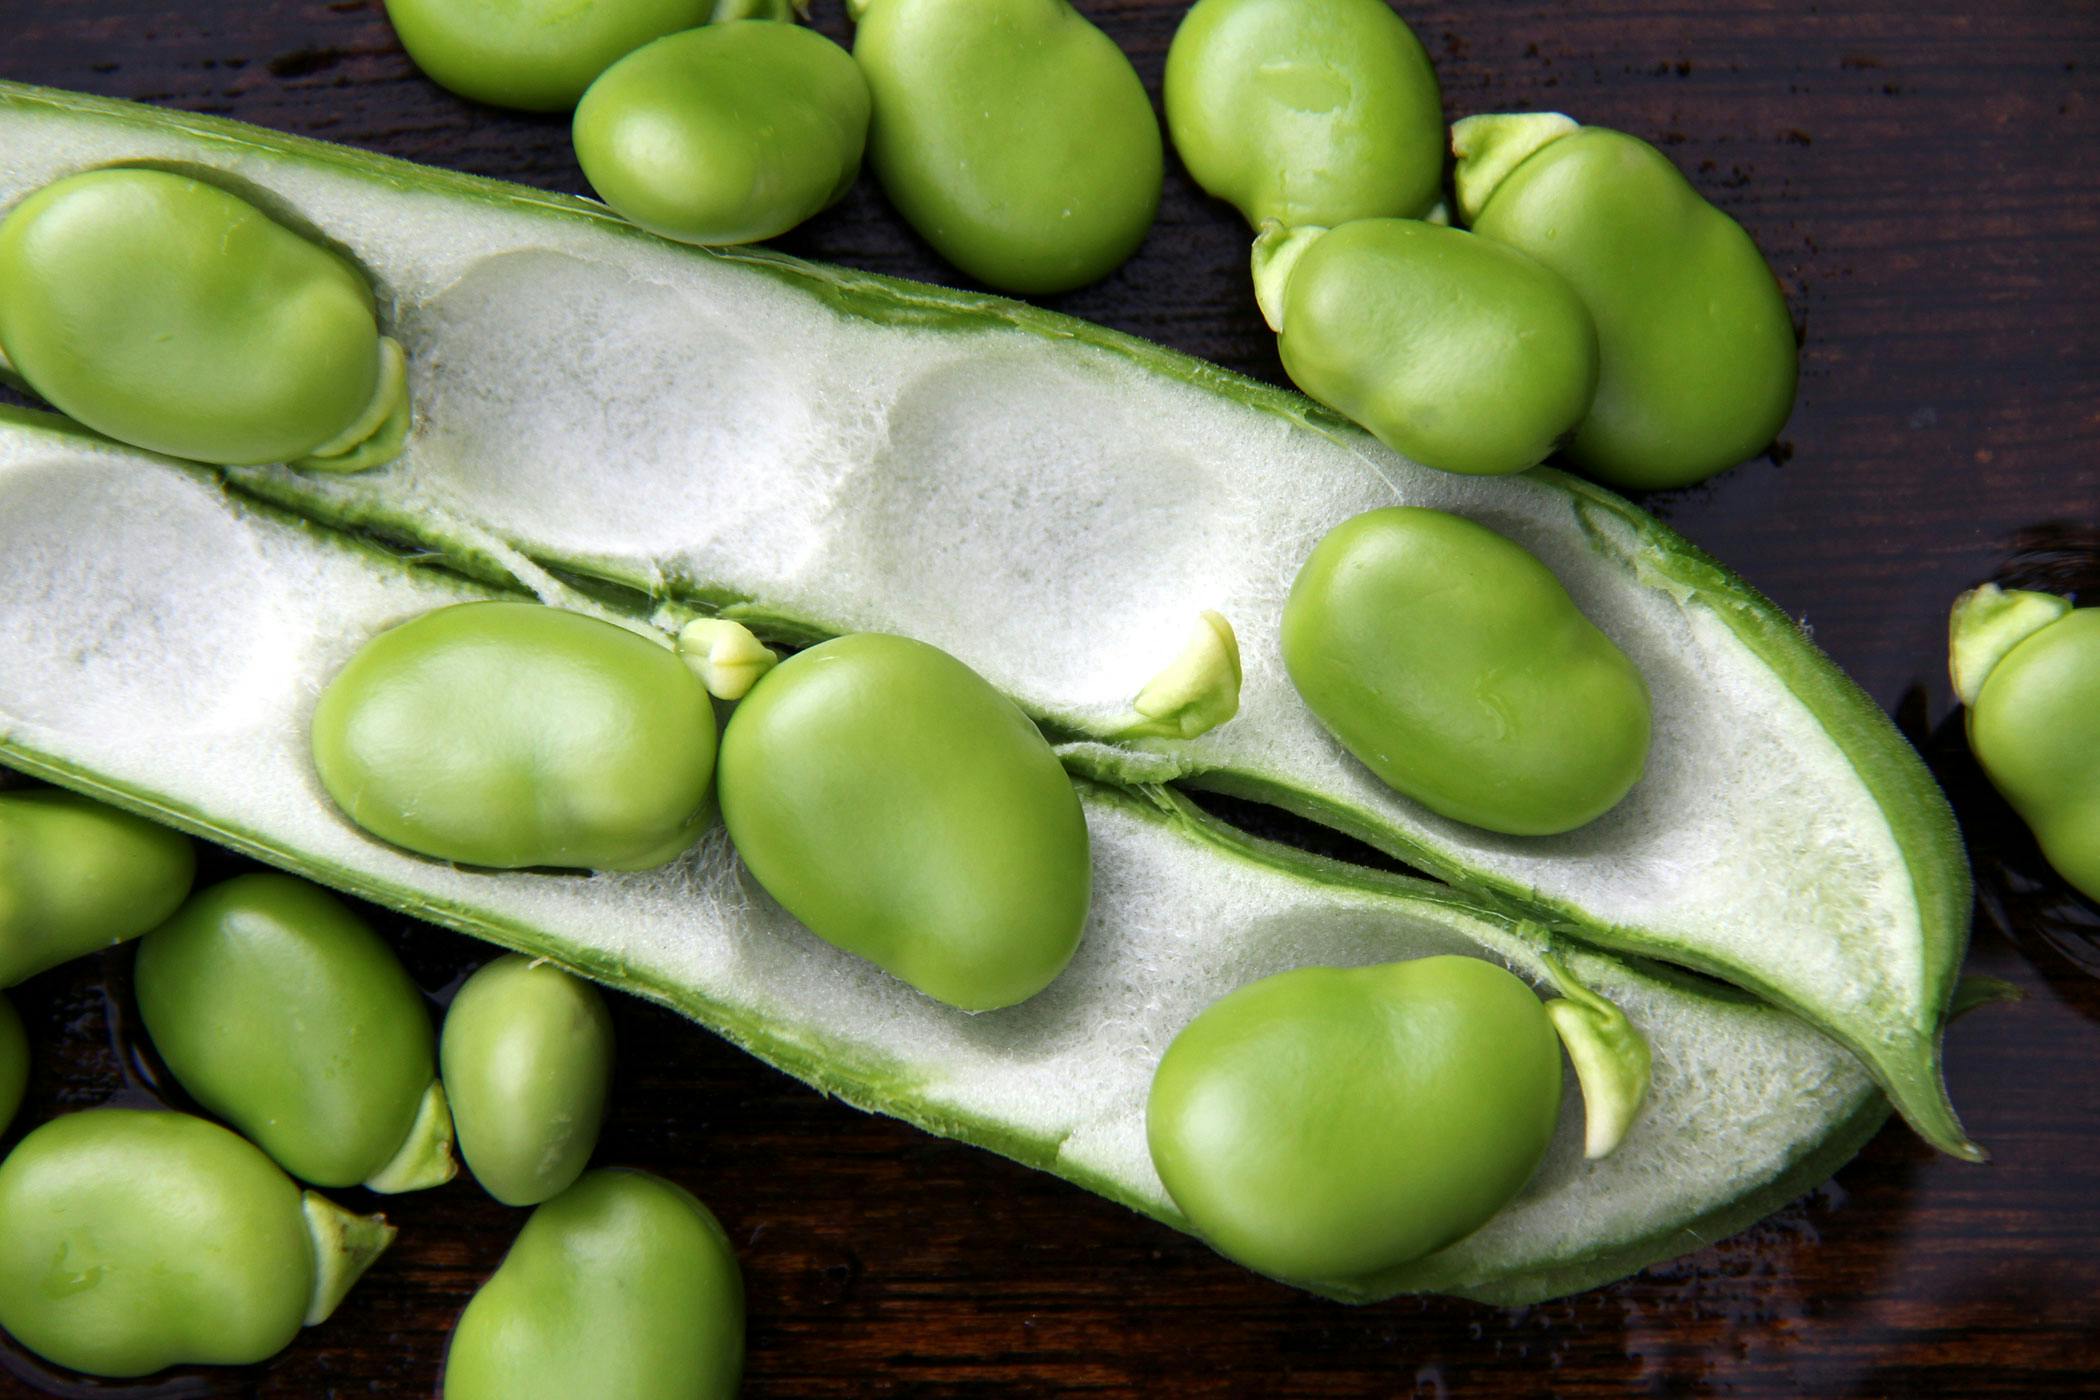 are broad beans poisonous to dogs